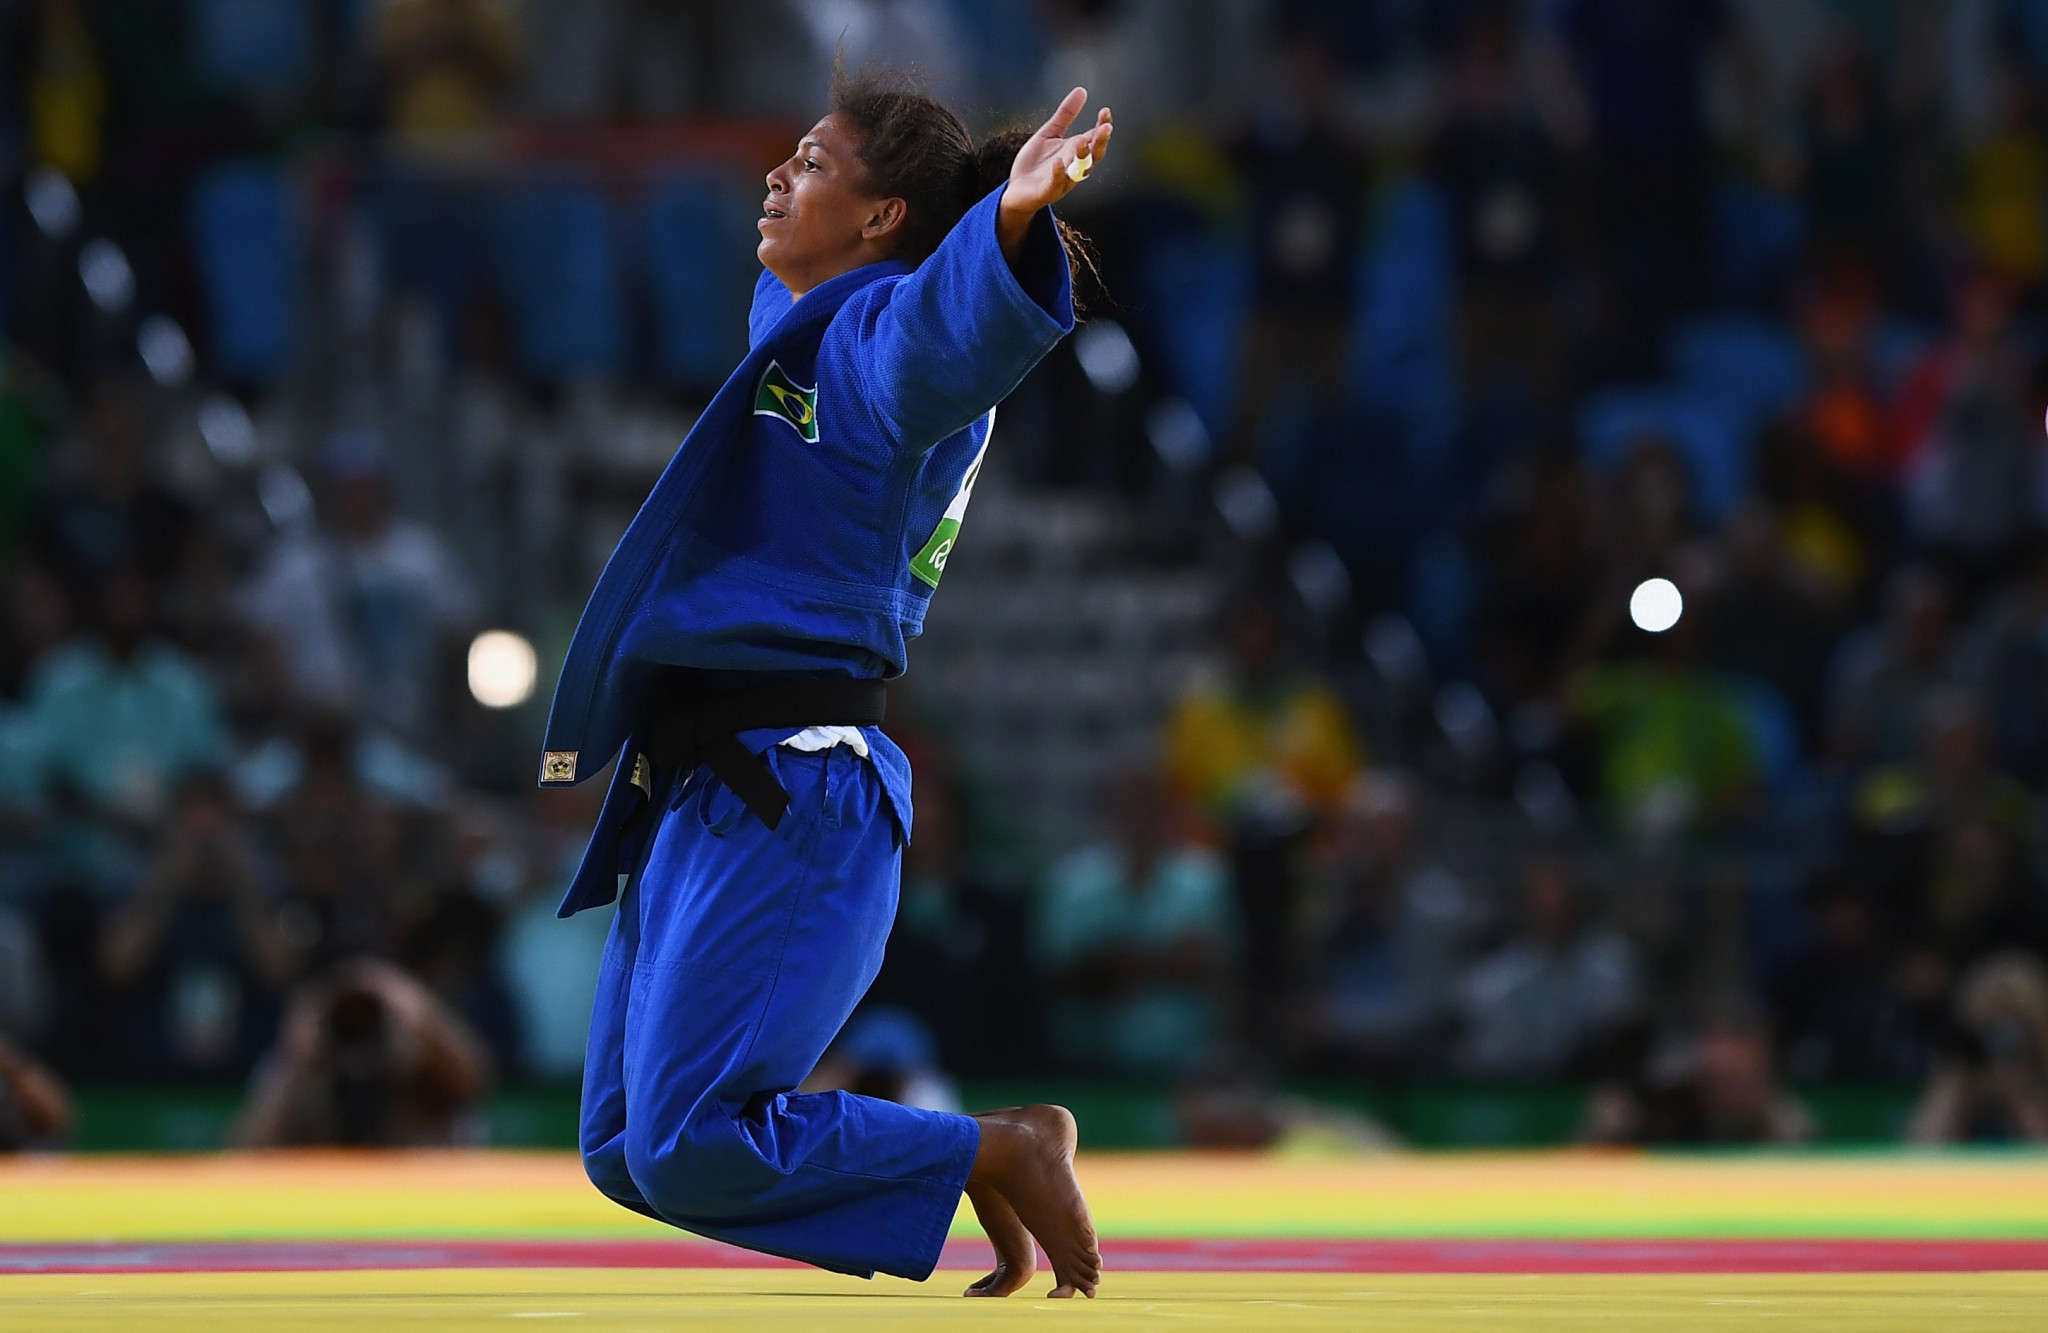 Rafaela Silva Lopes won Olympic gold in her home city at Rio 2016 ©Getty Images